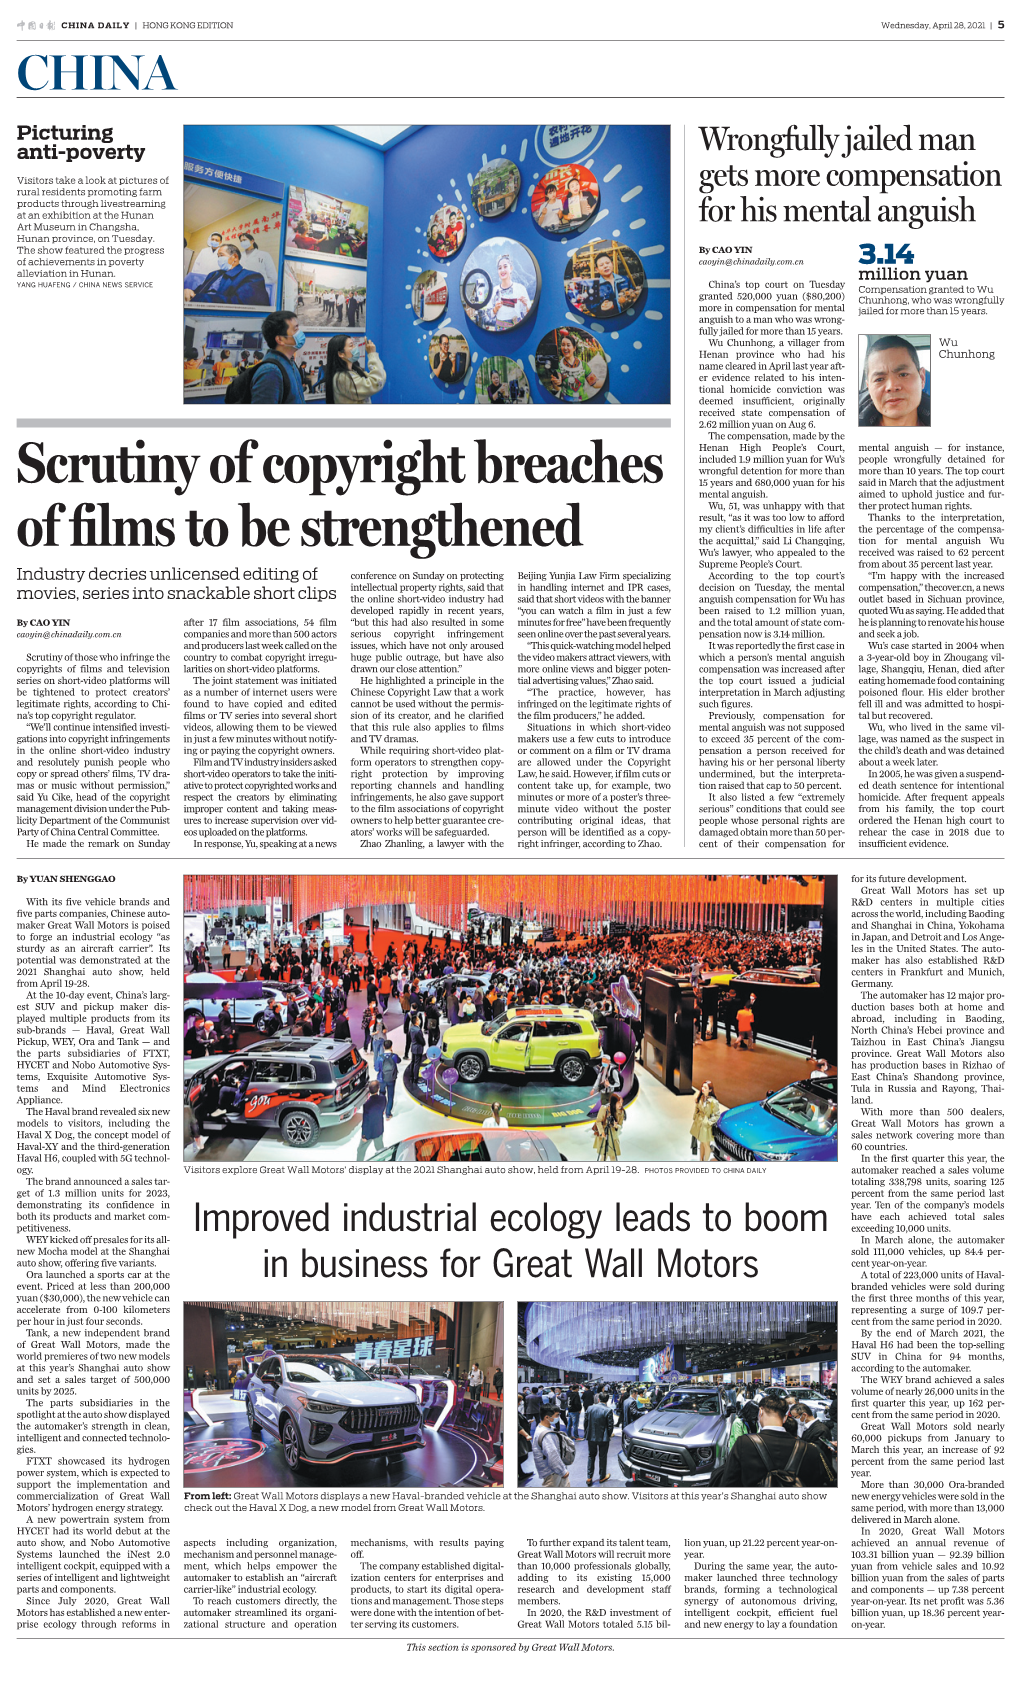 Scrutiny of Copyright Breaches of Films to Be Strengthened